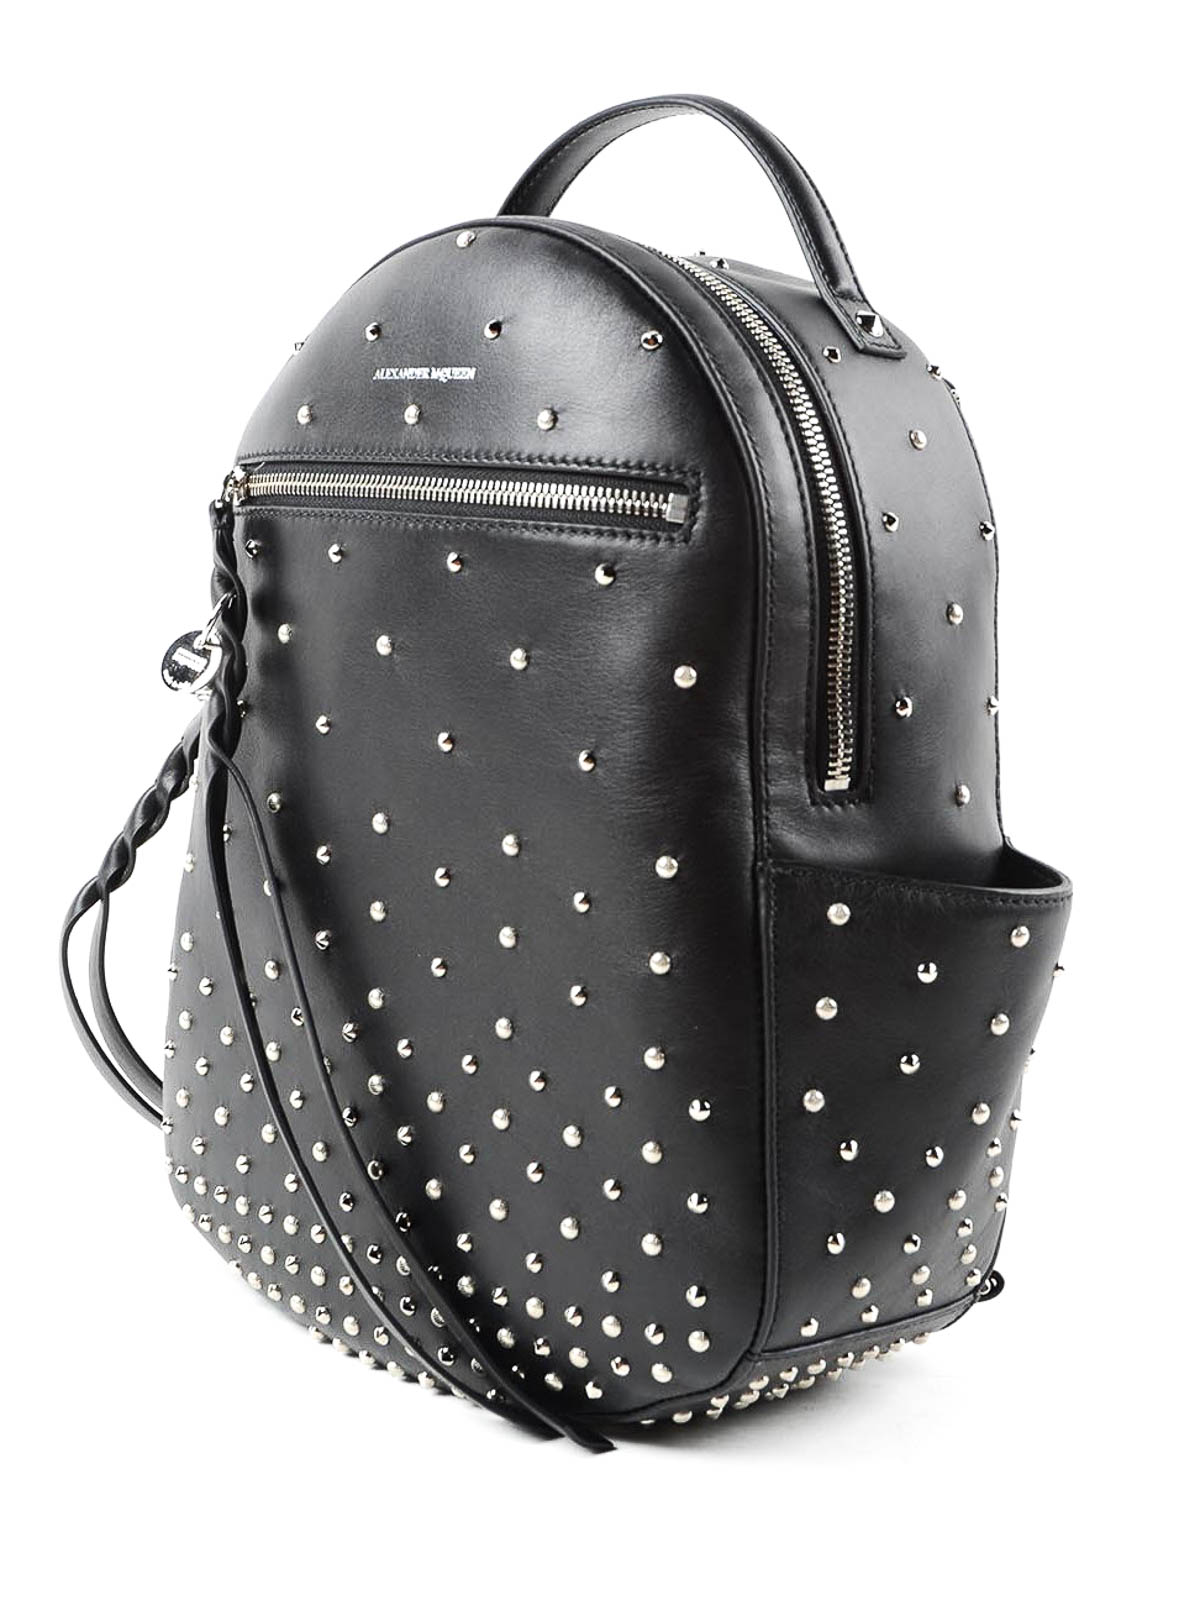 Studded leather mini backpack by Alexander Mcqueen - backpacks | iKRIX